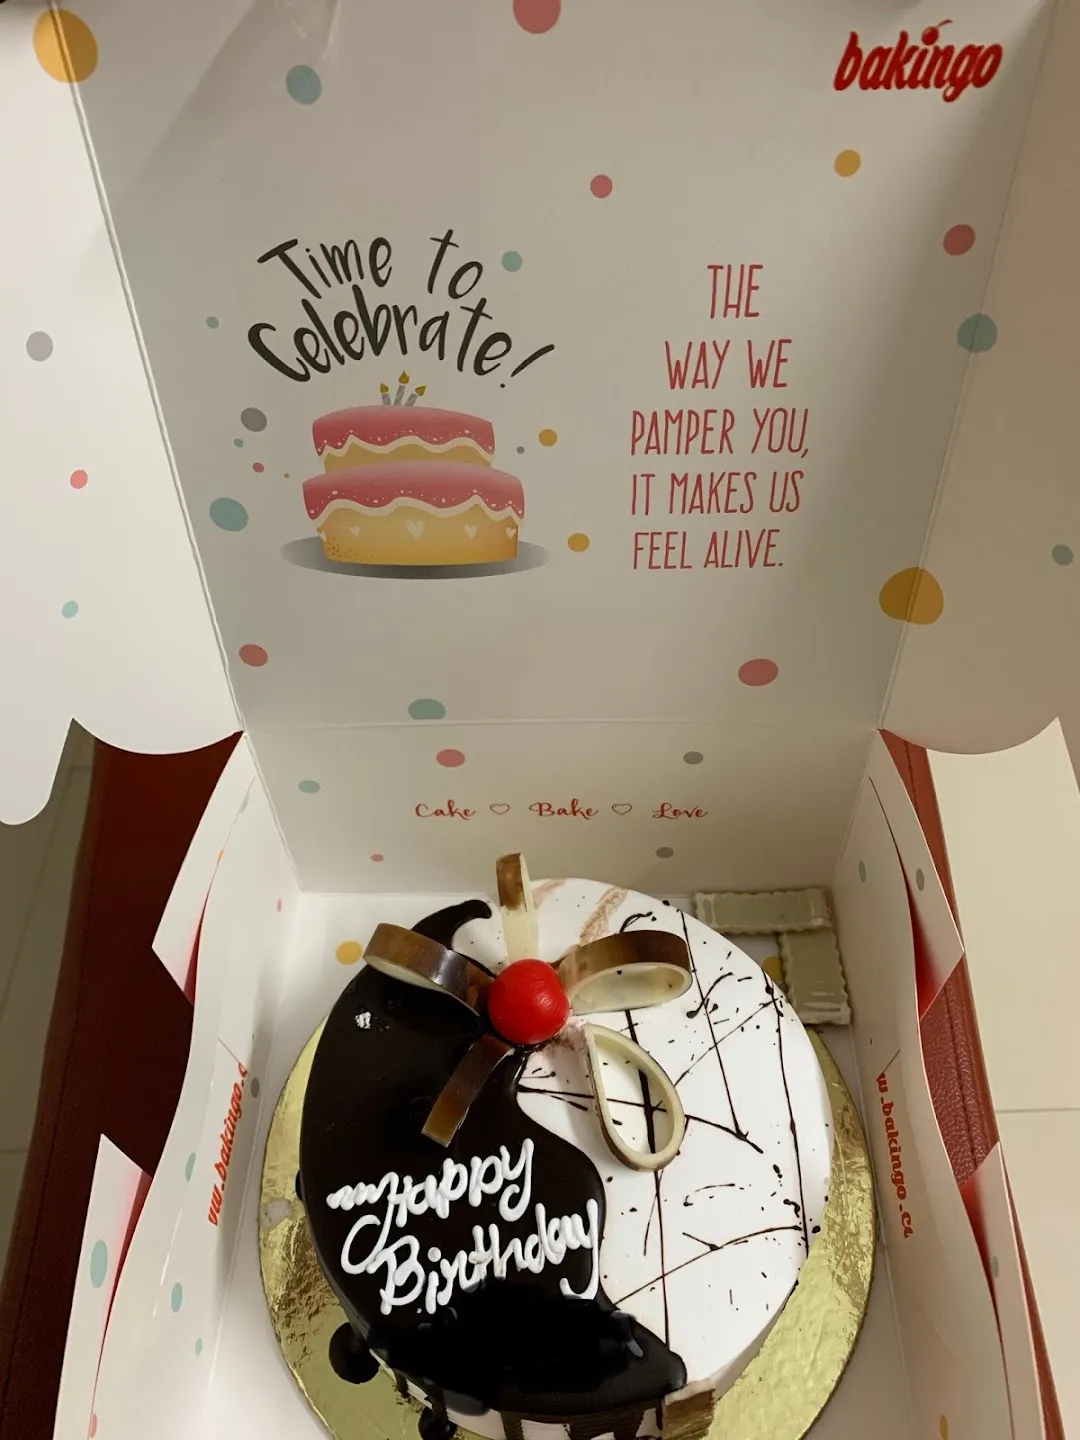 Bakingo Bakes Love and Romance With its Valentine's Day Cakes